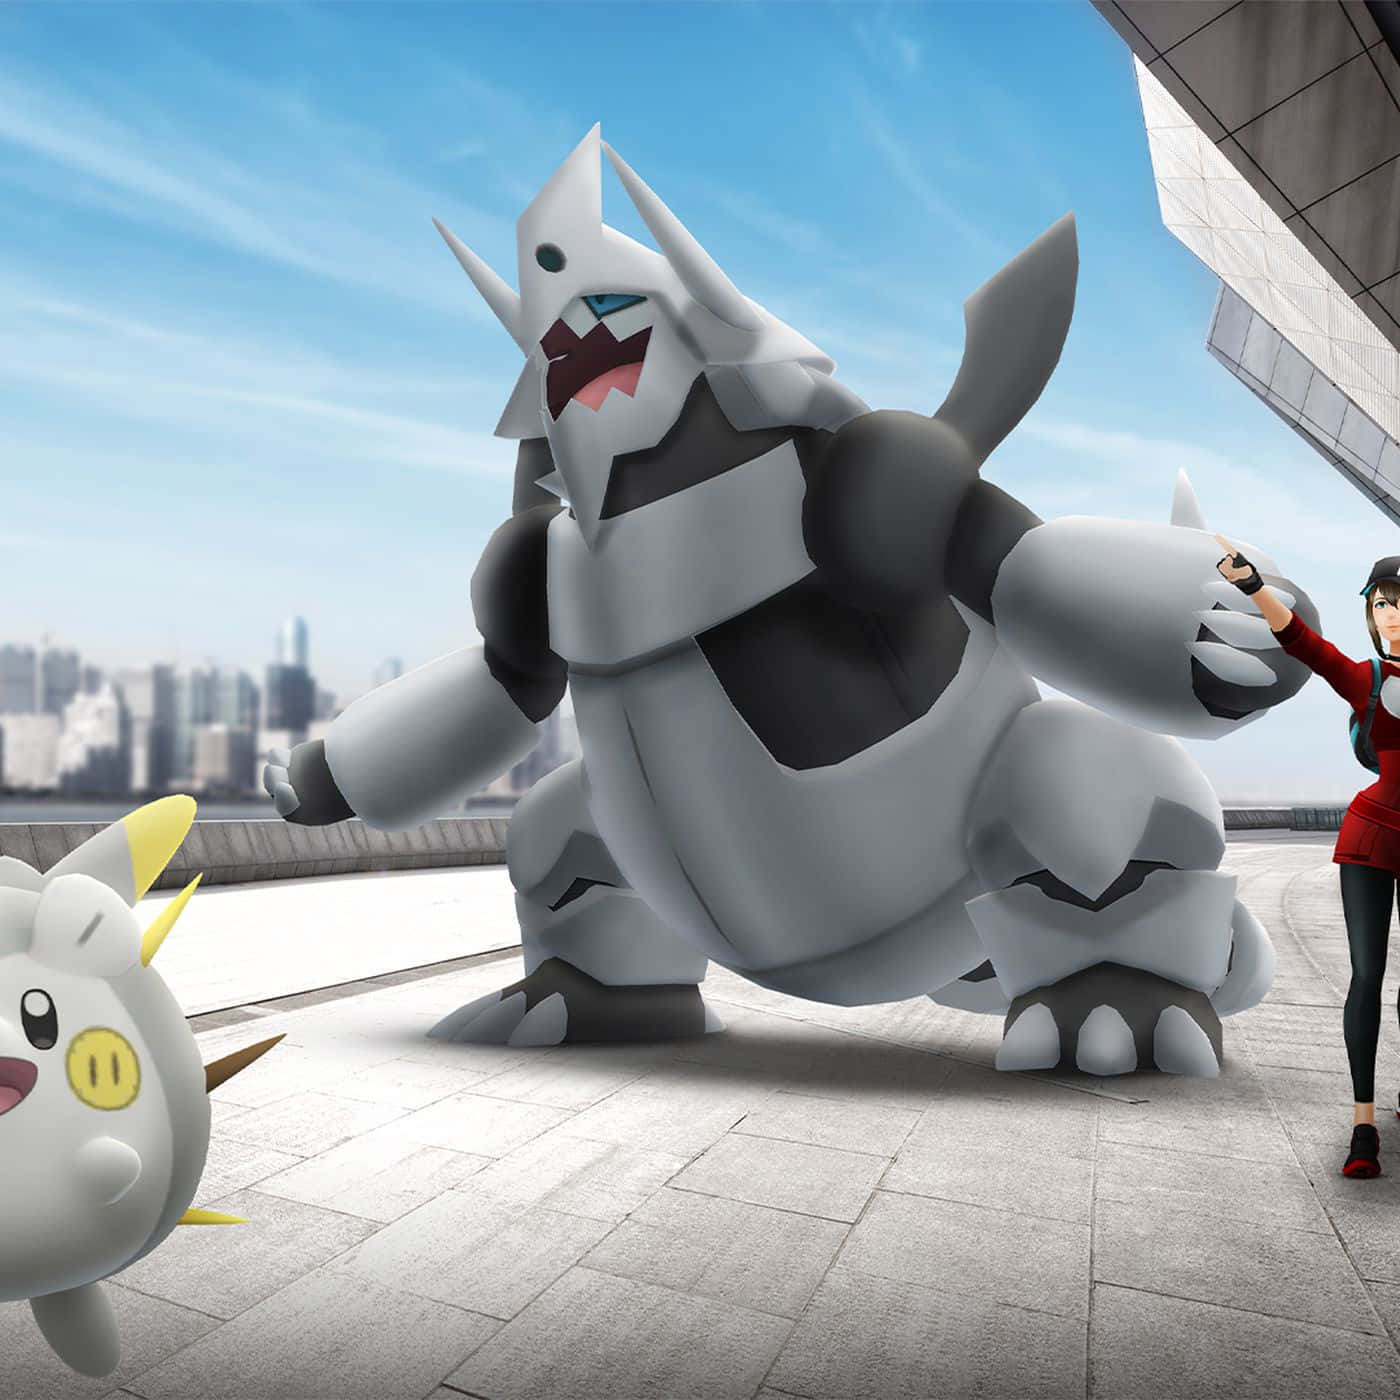 Join the epic 3D journey to explore and capture powerful Pokémon Wallpaper